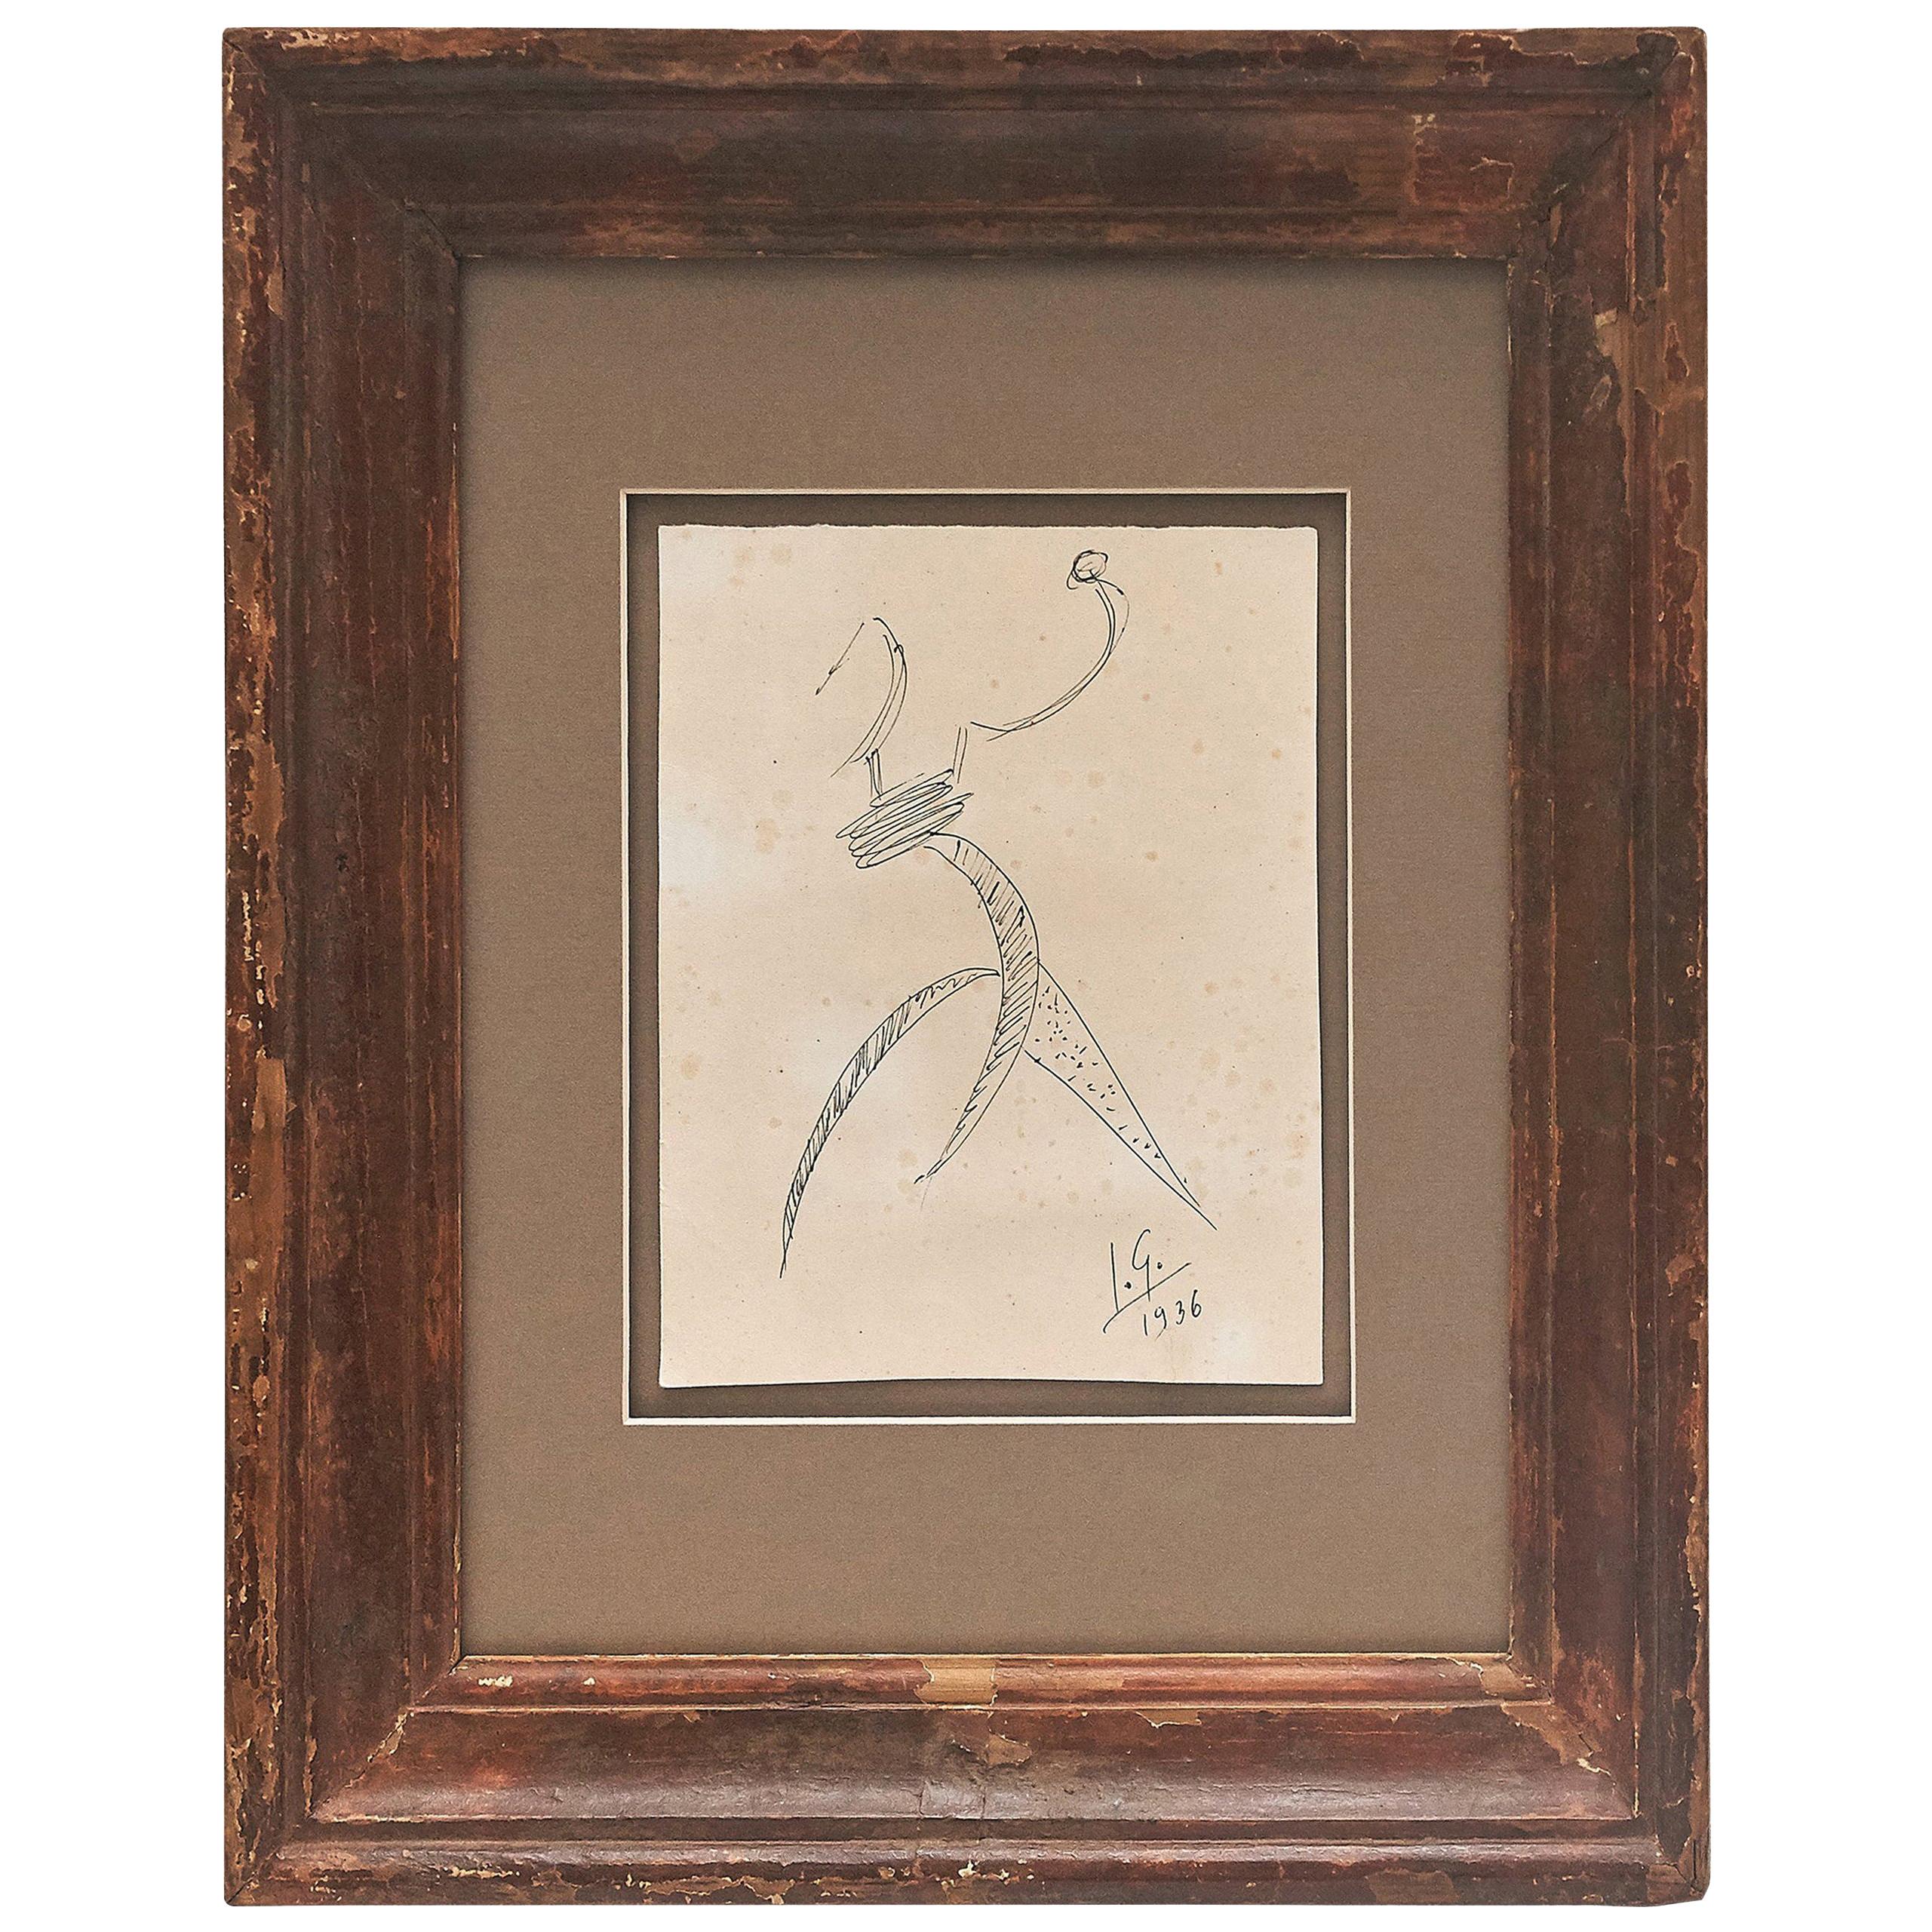 Julio González Hand Signed Drawing, 1936